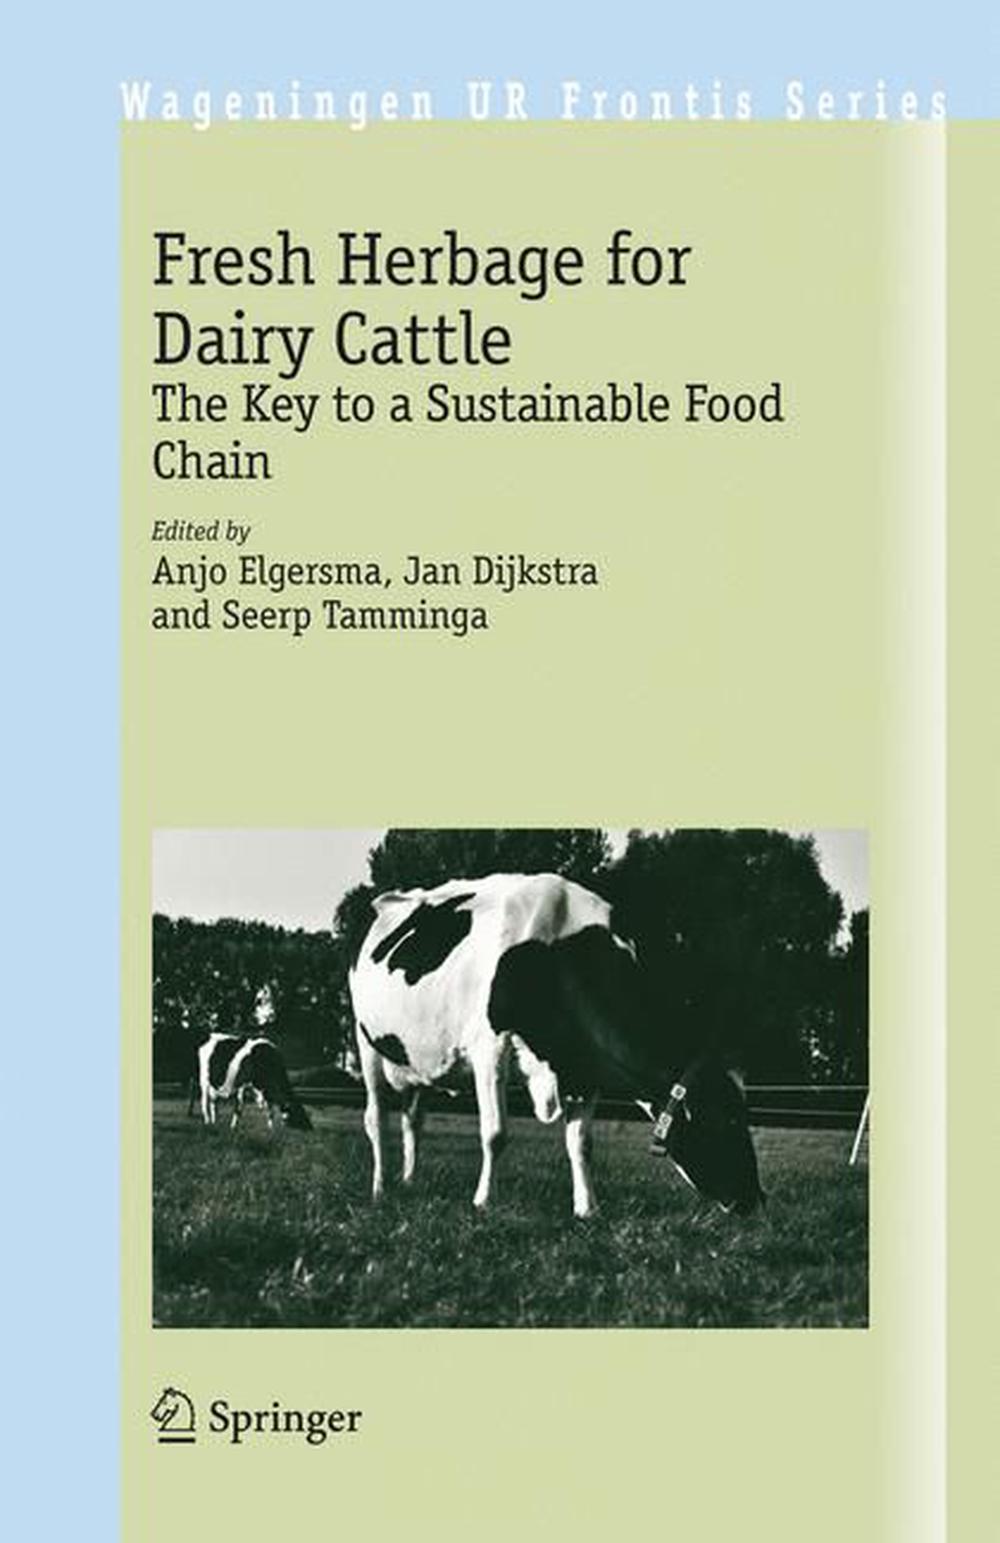 Fresh Herbage for Dairy Cattle: The Key to a Sustainable Food Chain by ...